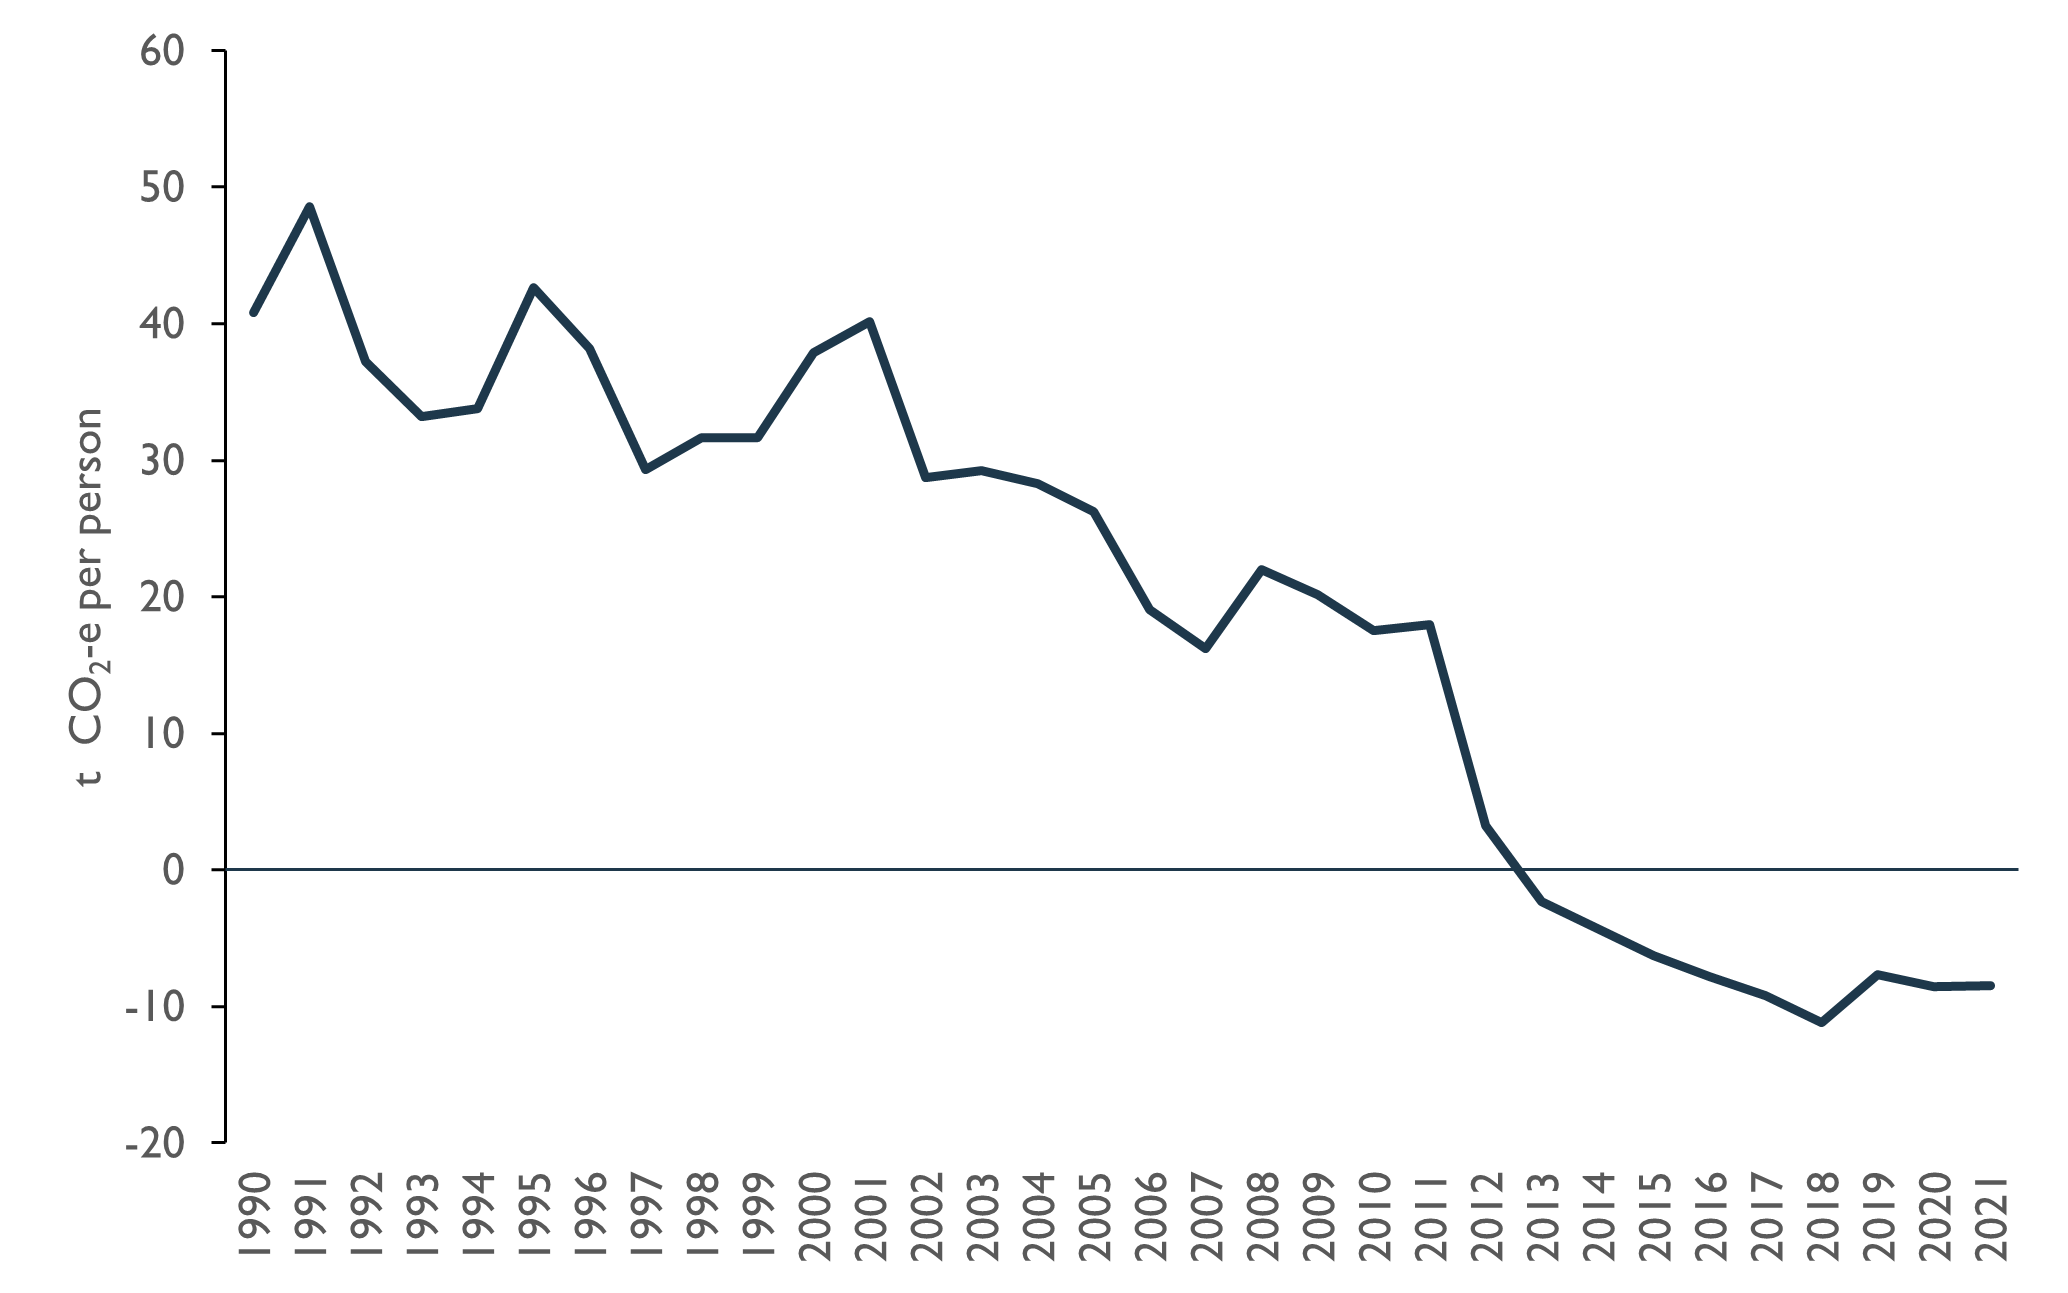 This figure is a line chart showing that Tasmania's emissions per person have decreased from 48.6 t CO2-e in 1990 to minus 8.5 t CO2-e in 2021, a reduction of 120.7 per cent over 30 years. Emissions per person declined steadily between 1990 and 2011, from 2011 they drop sharply to 2021.